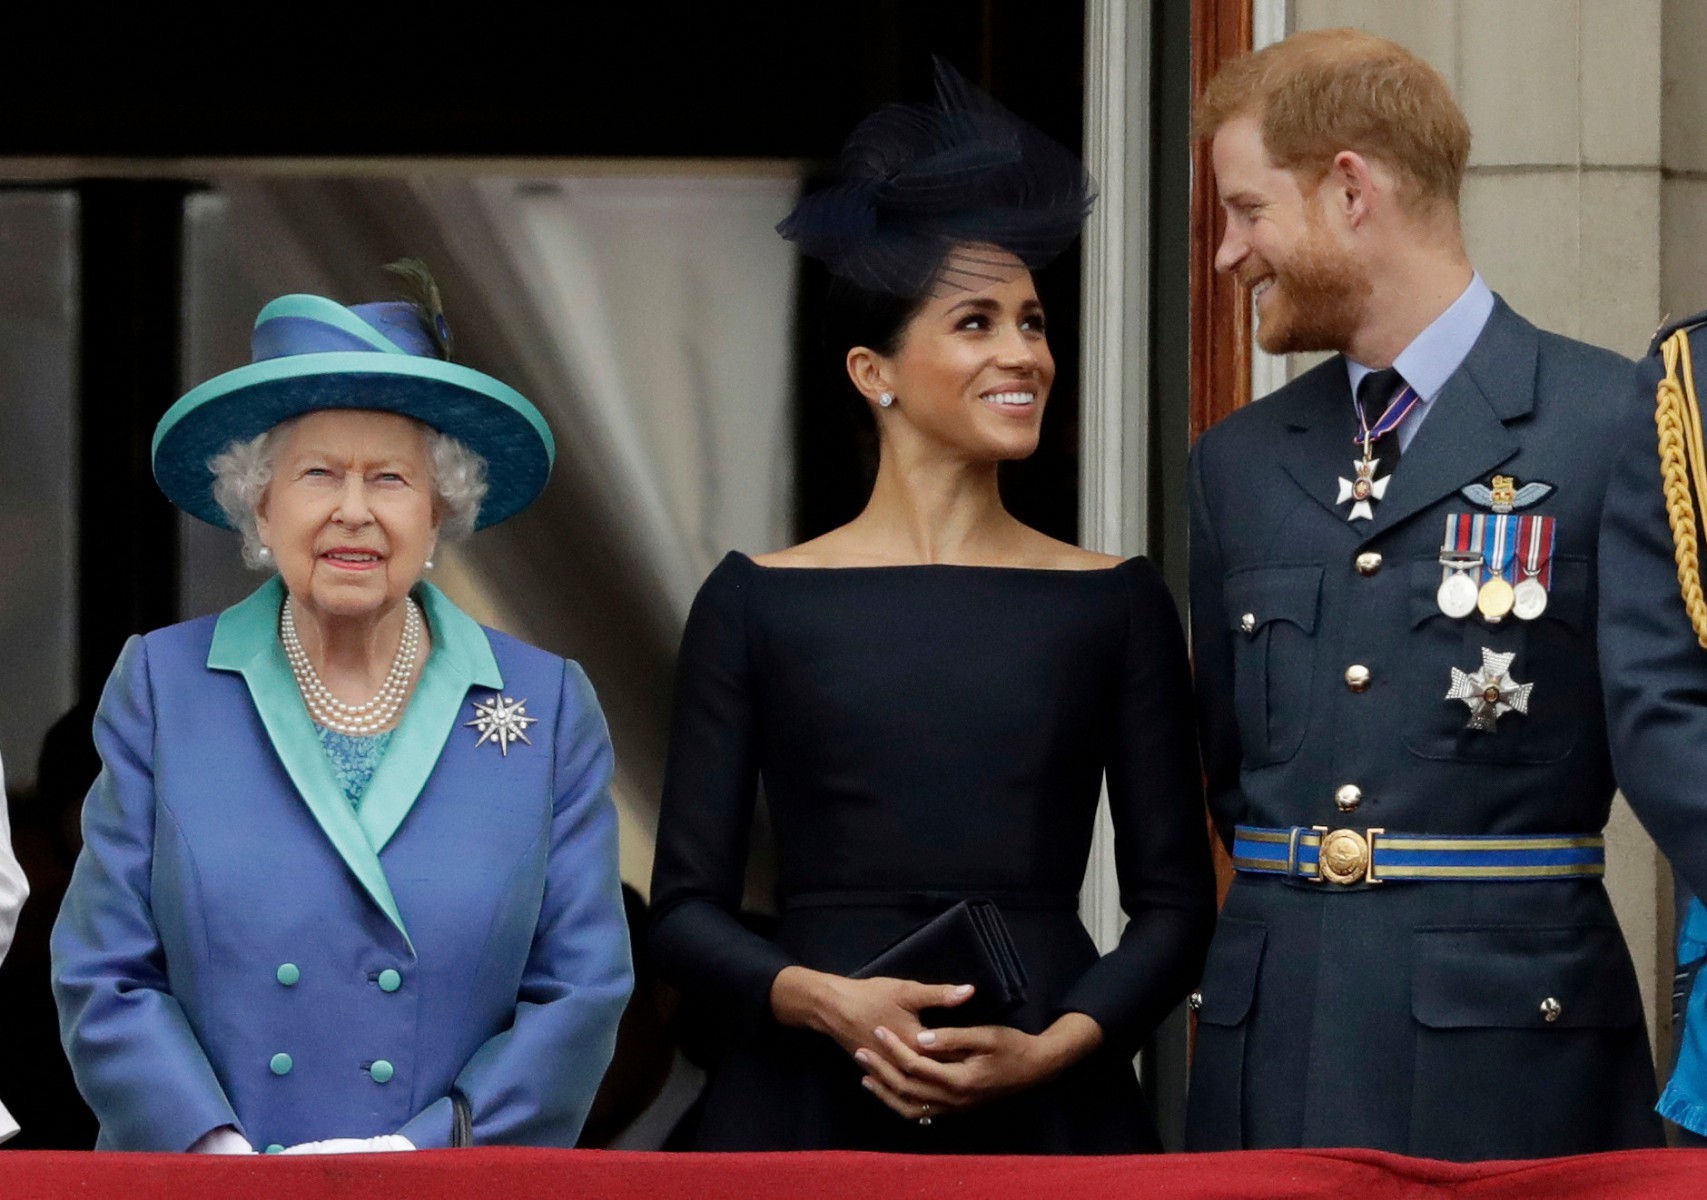 Meghan Markle and Prince Harry stood down during the tumultuous time with the Royal Family